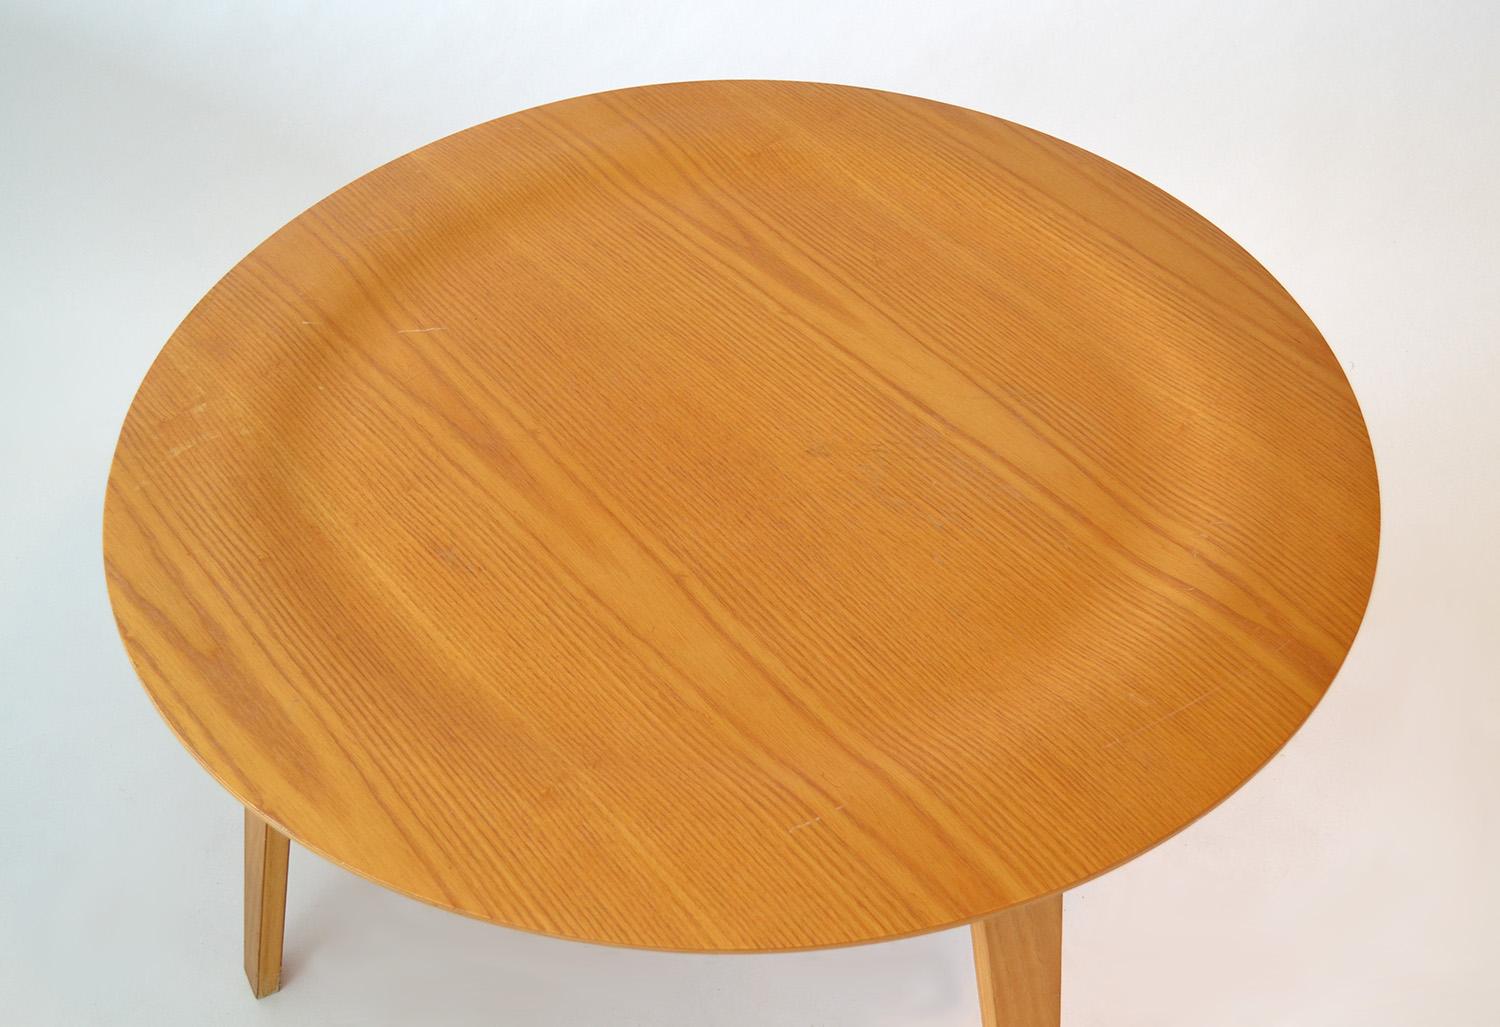 American Charles and Ray Eames CTW Coffee Table in Plywood Herman Miller 2000s For Sale